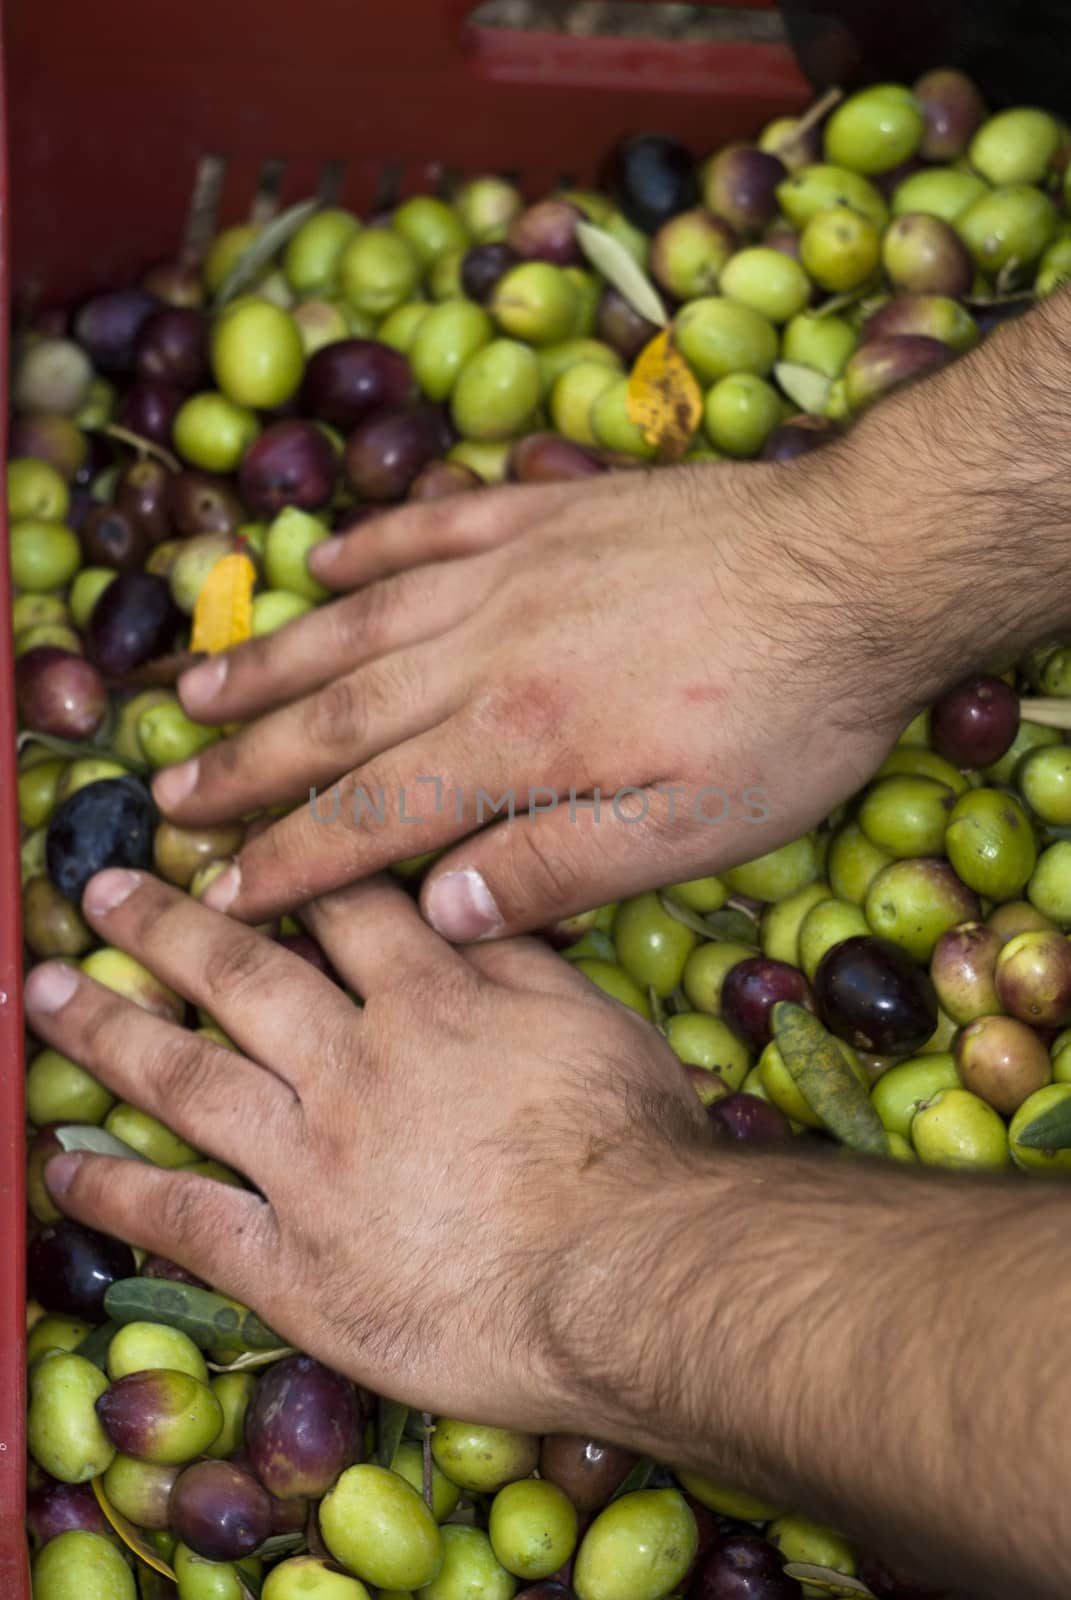 These hands are checking the olive harvest.Olives picking in Sicily- Italy